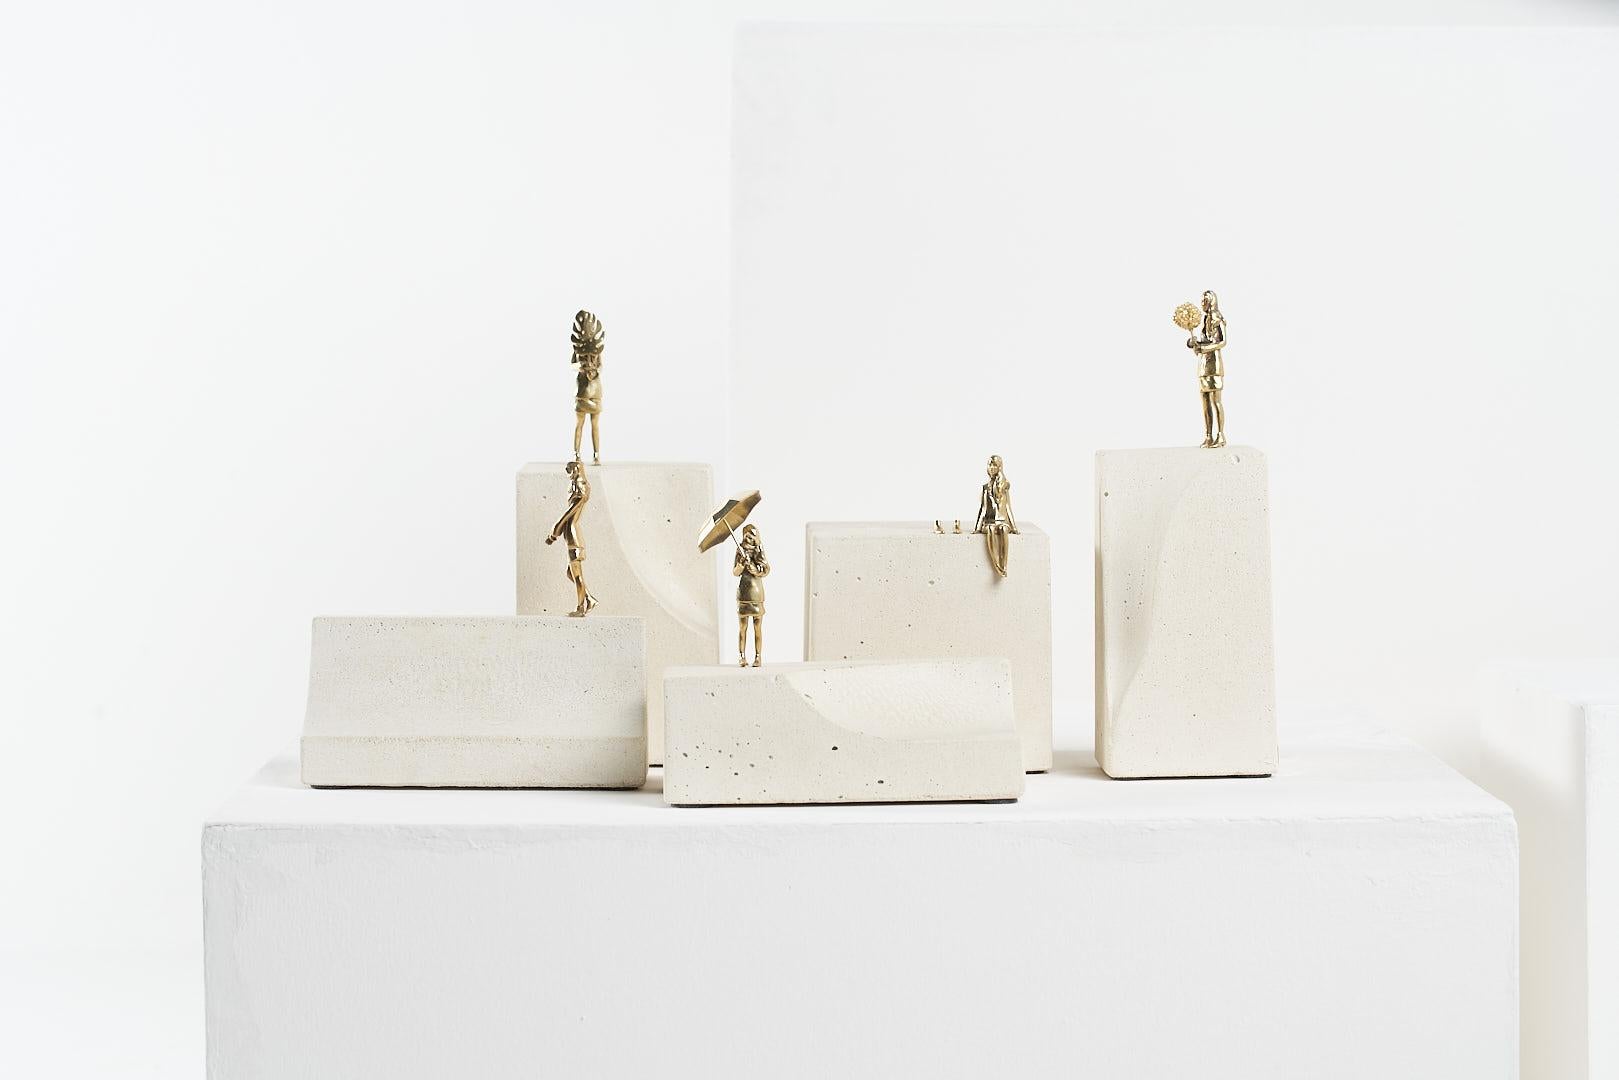 SCULPTURE SERIES SINESTESIA

“Freedom is normal air, without exotic perfumes, which breathes together with oxygen without thinking about it, but aware that it exists.” Juan Carlos Onetti

The Sinestesia Series parades through the perspective of